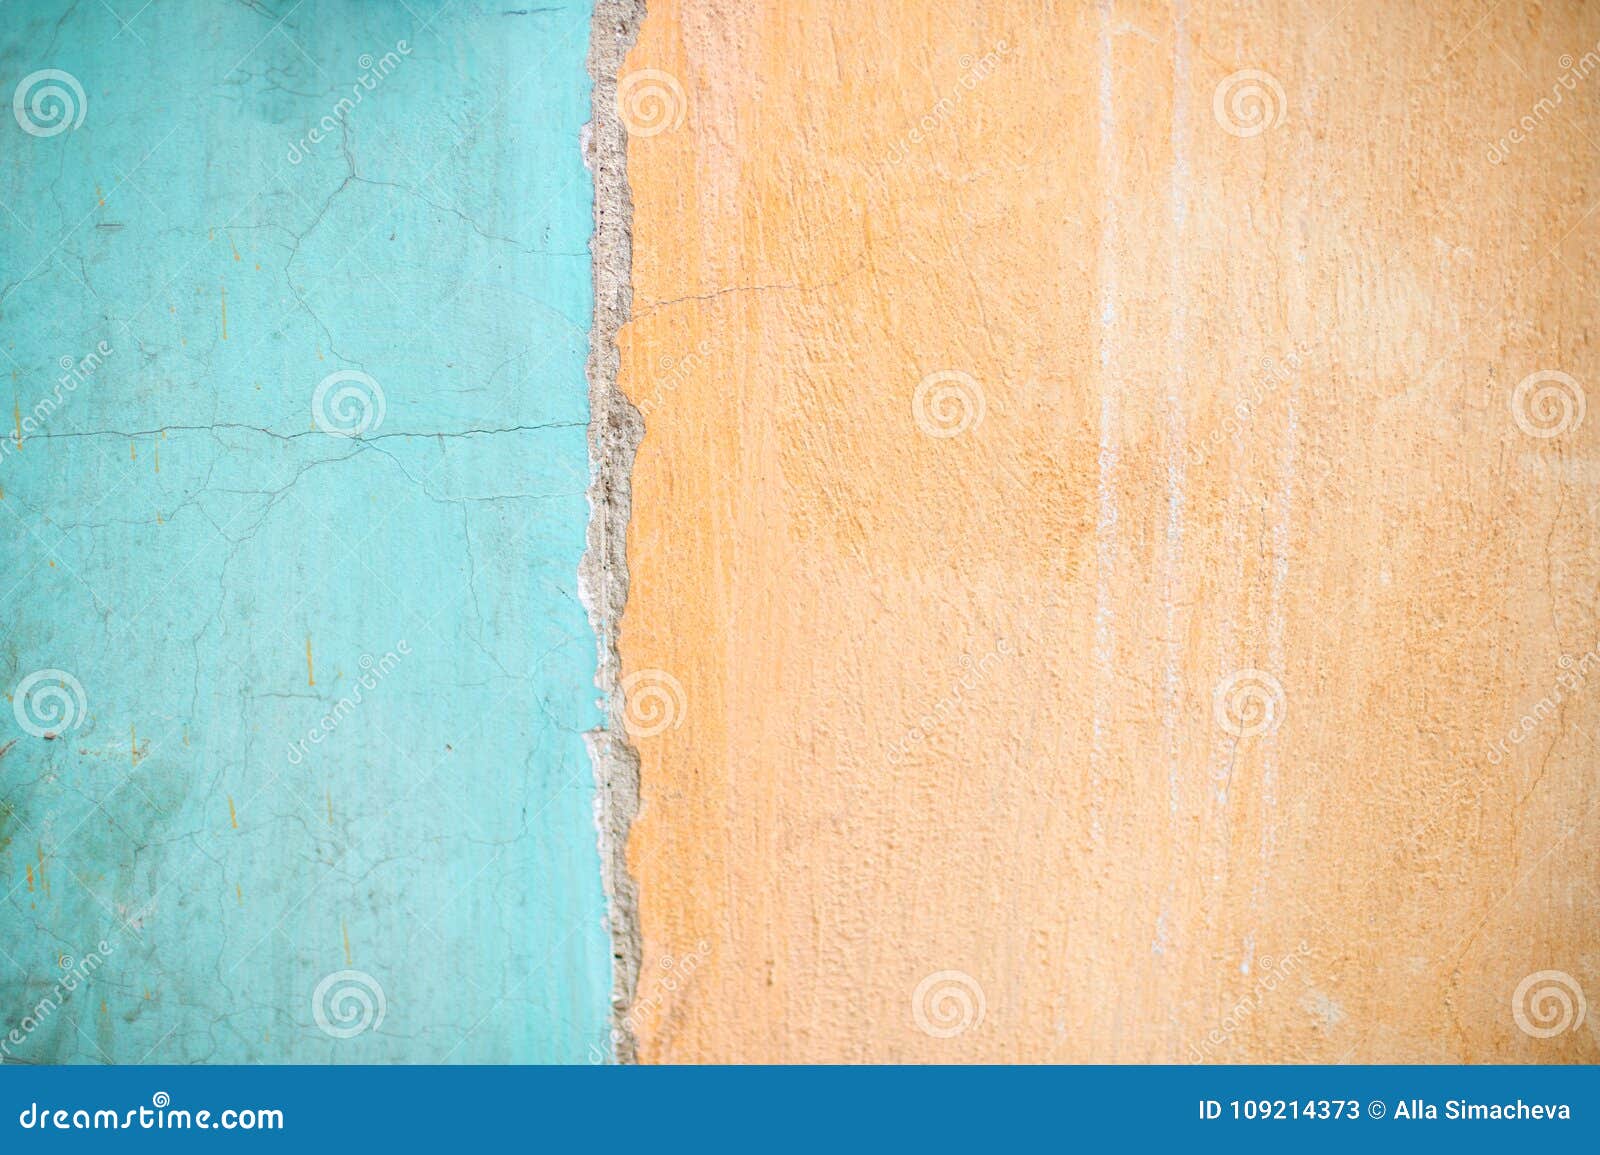 Two Colour Grunge Wall Background Stock Image - Image of scratched,  weathered: 109214373